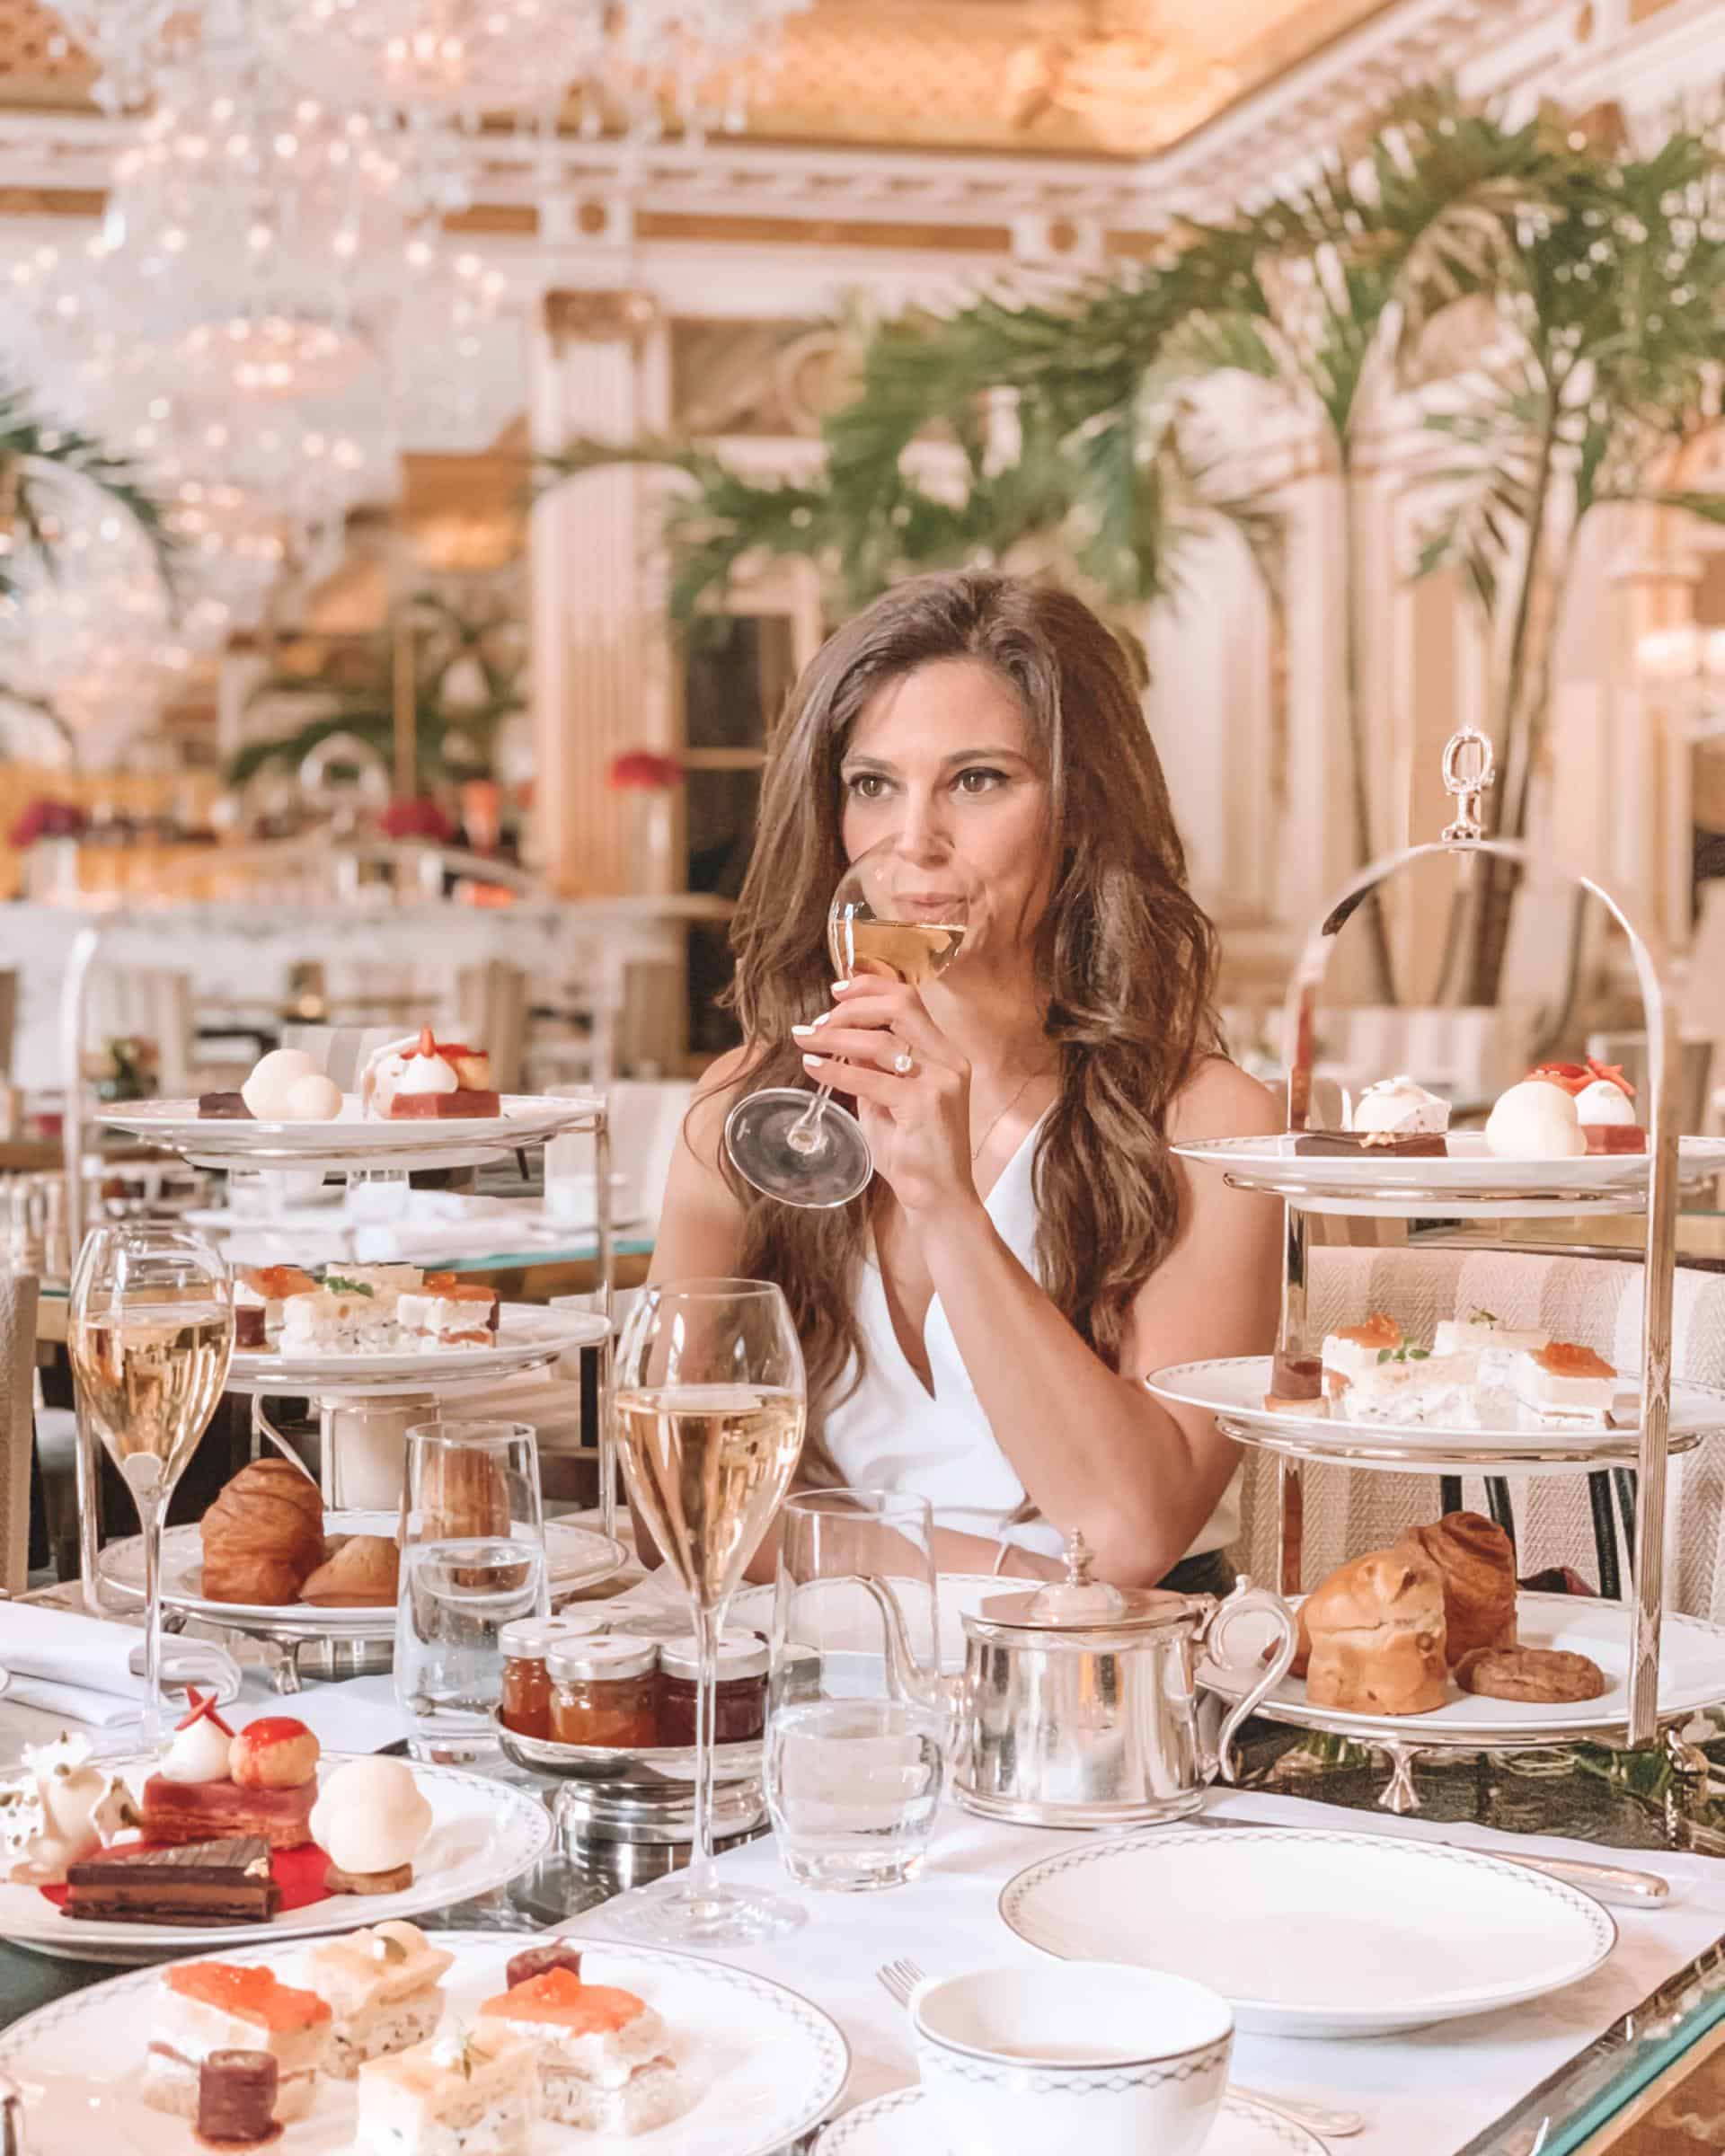 Afternoon tea time at the Peninsula